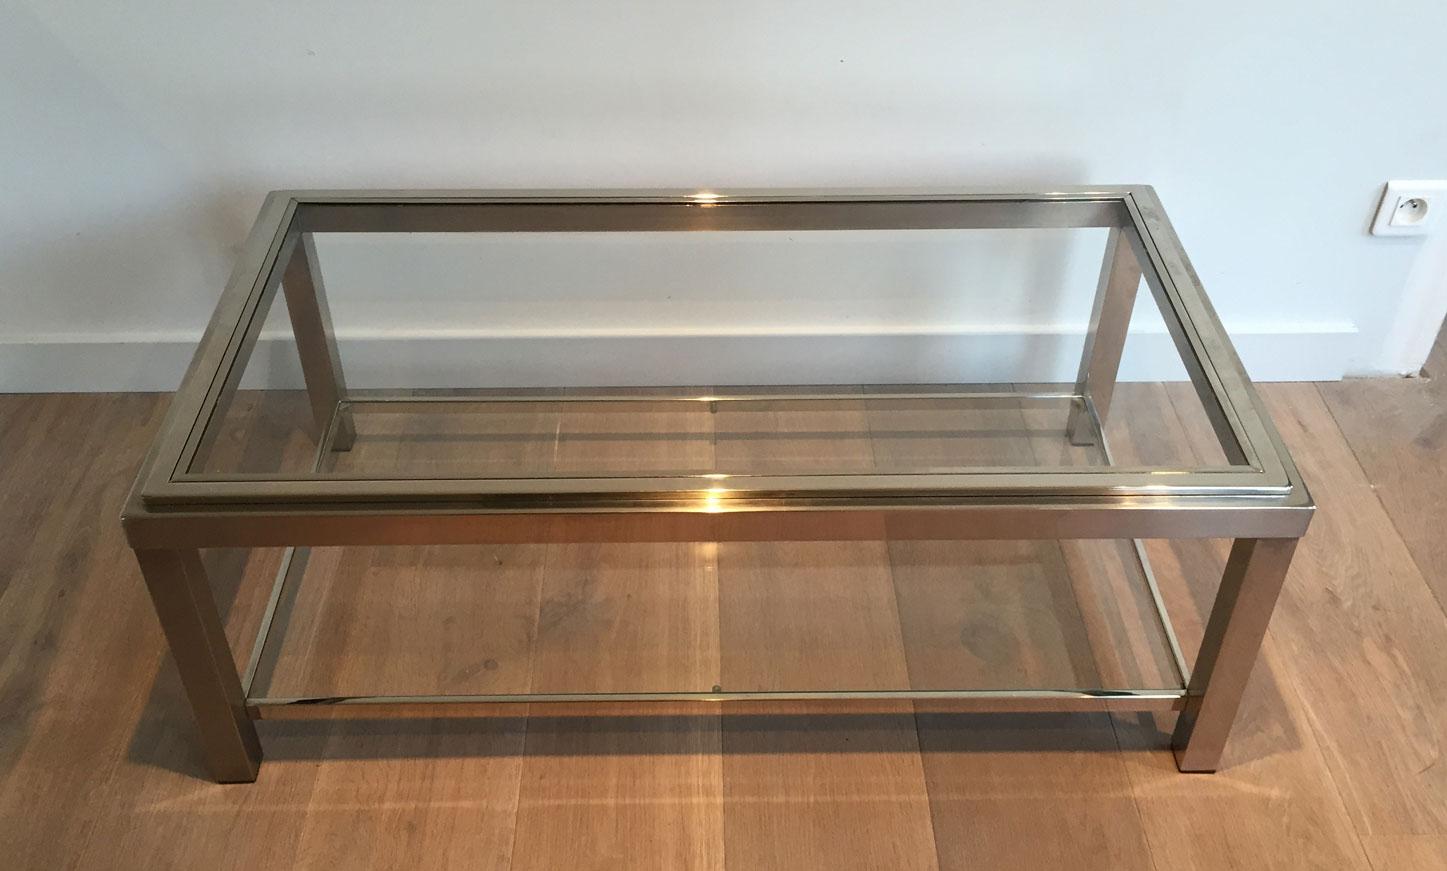 This coffee table is made of chrome with two glass shleved. The top glass shelves is inserted in a chrome frame. This is a French work of very nice quality, circa 1970.